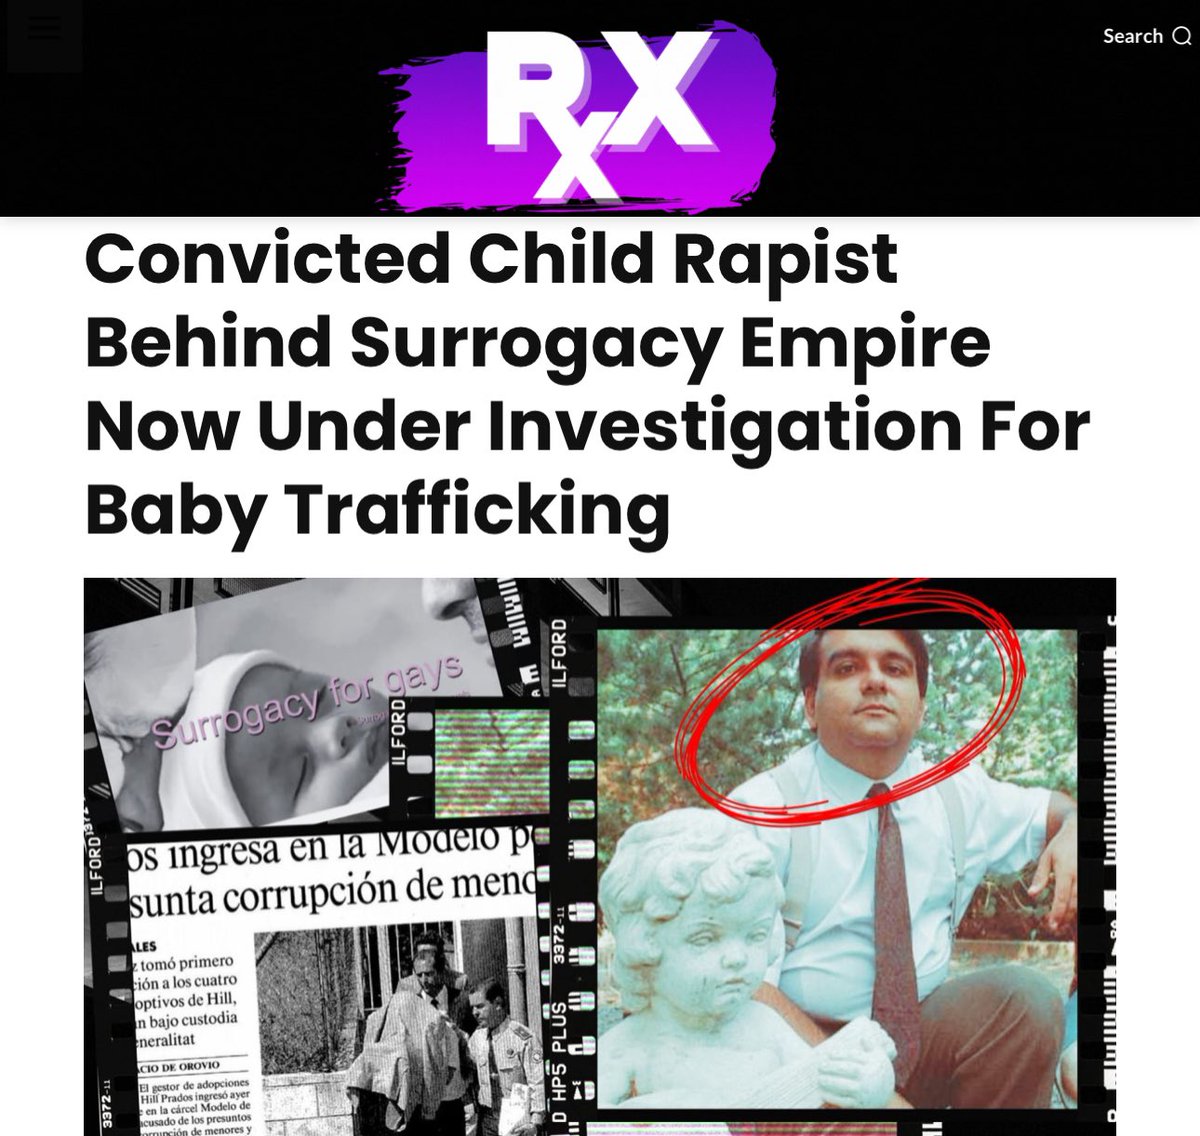 things that make you go hmm: one of the largest surrogacy orgs in the world catering to gay men is run by a convicted child rapist who went into business with one of the boys he raped.